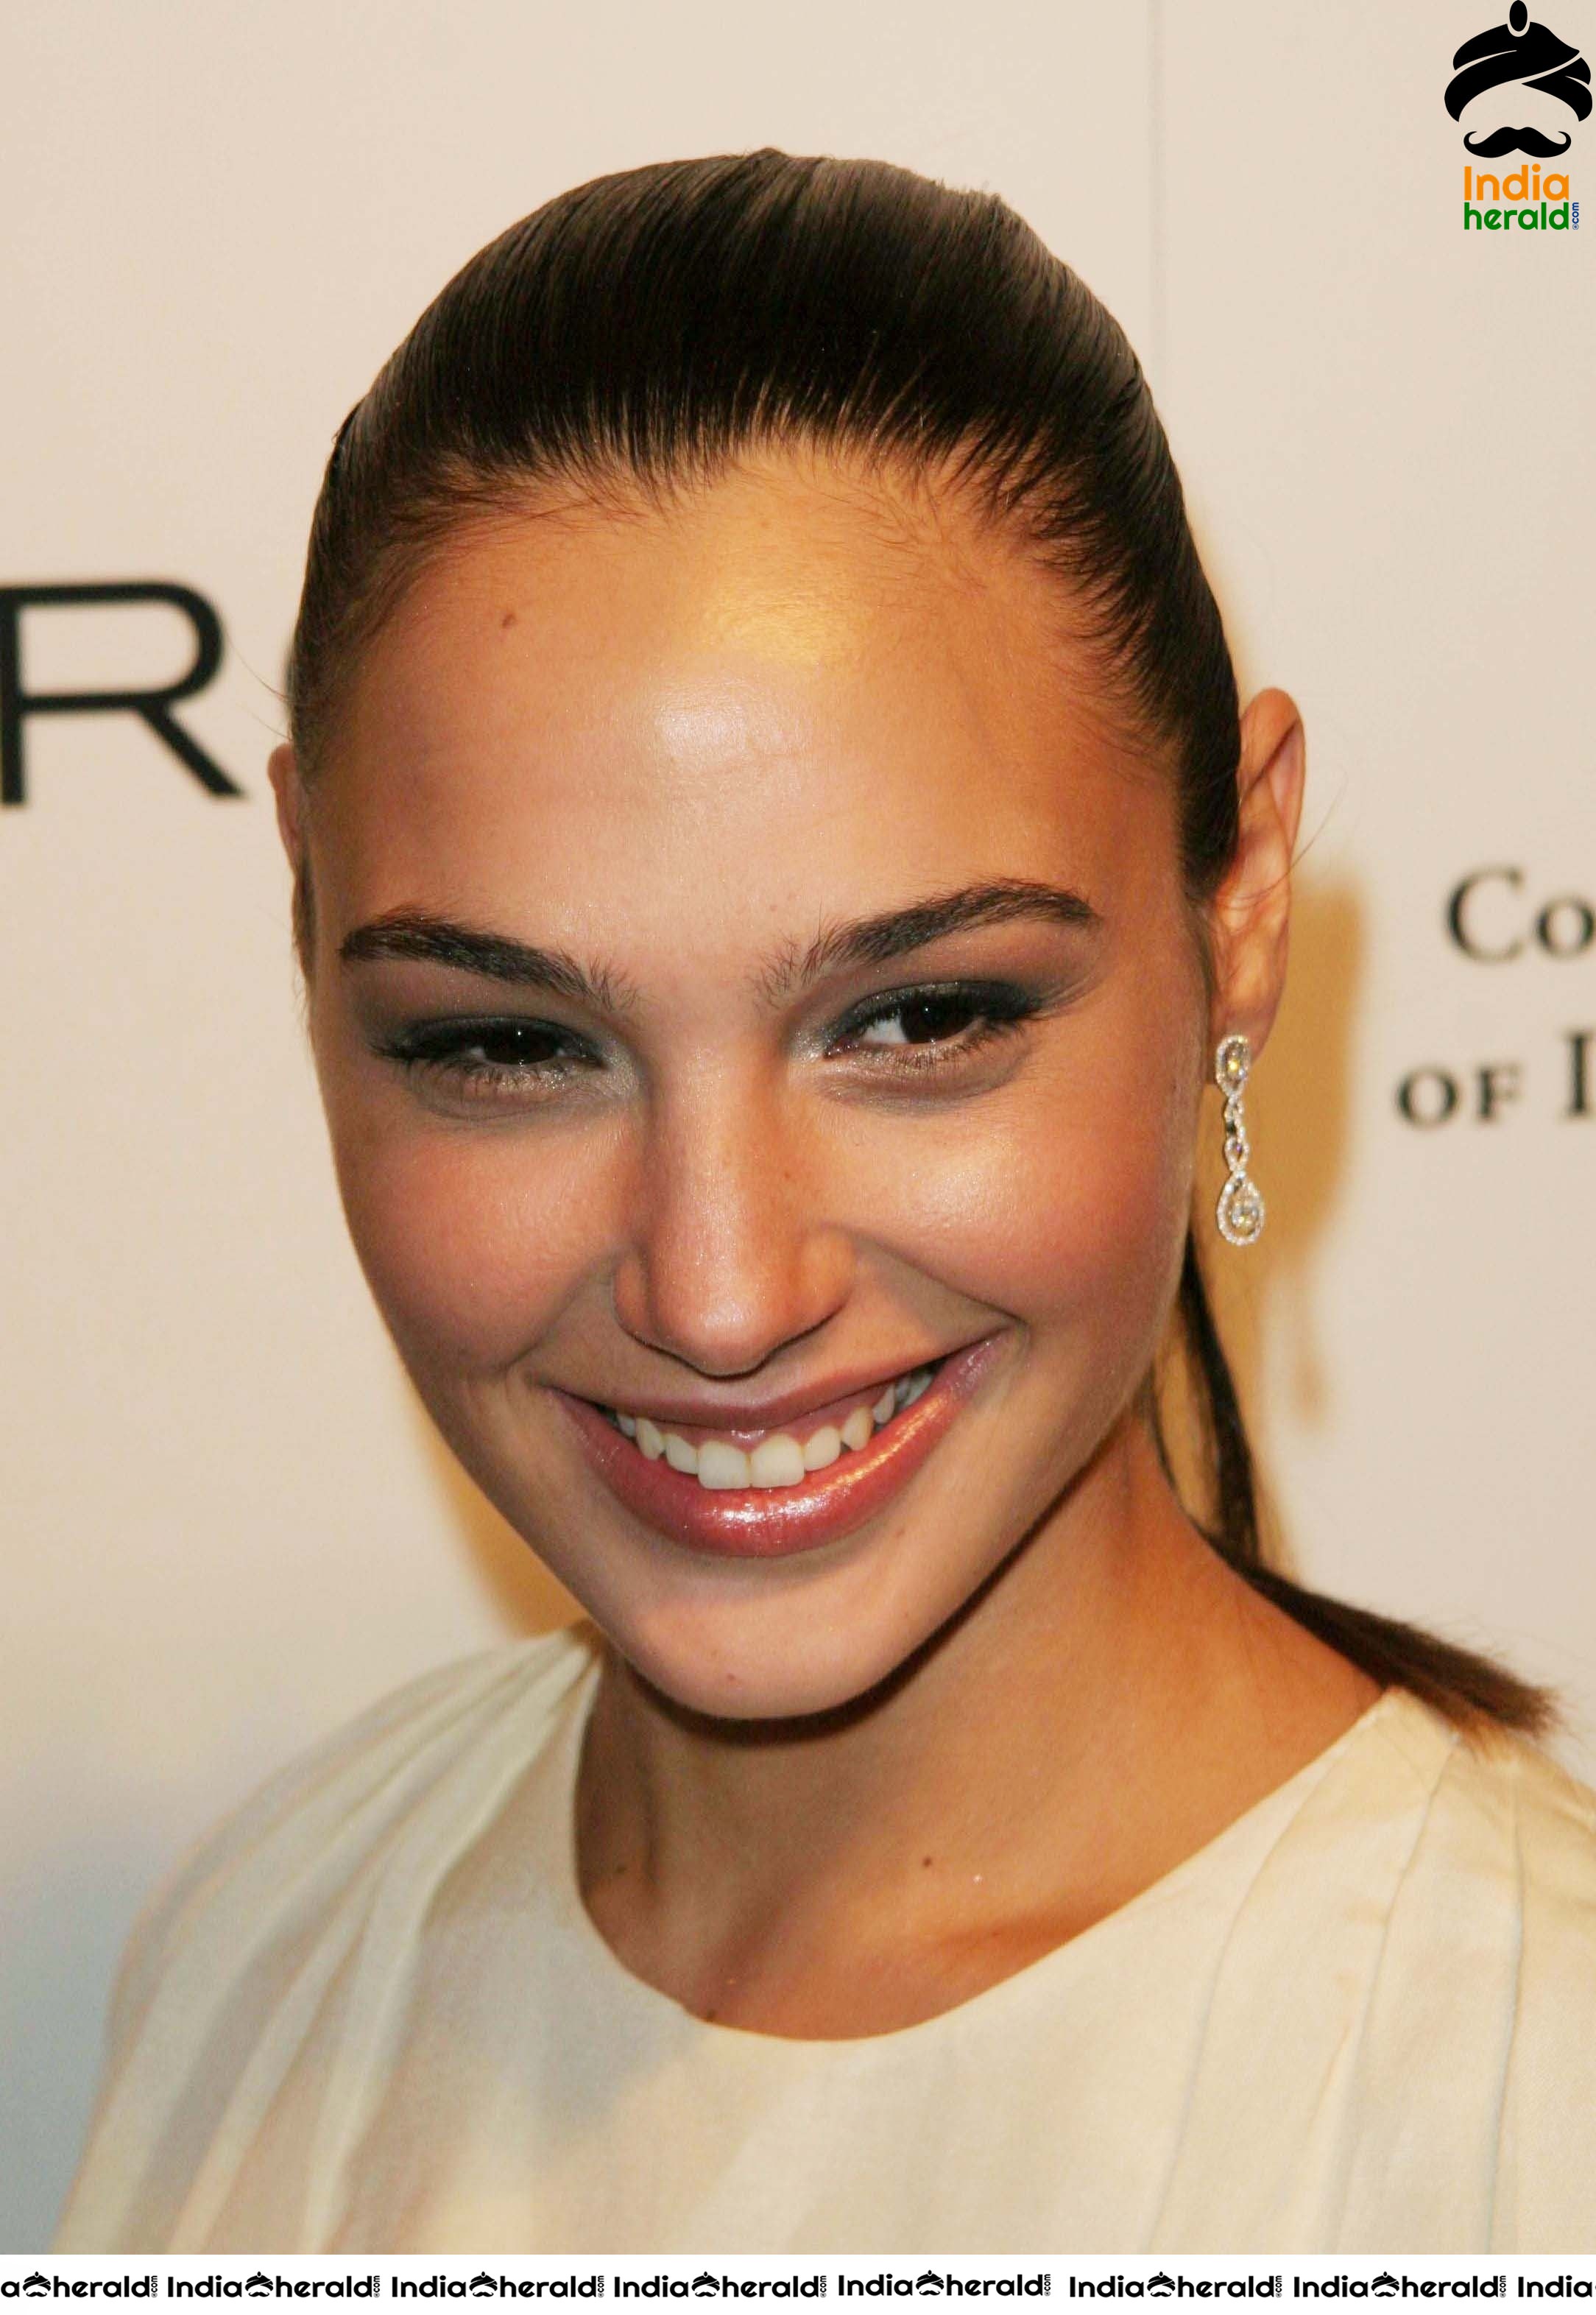 Gal Gadot at Maxim Celebrates Israel Women of Defense Forces in NYC Set 2